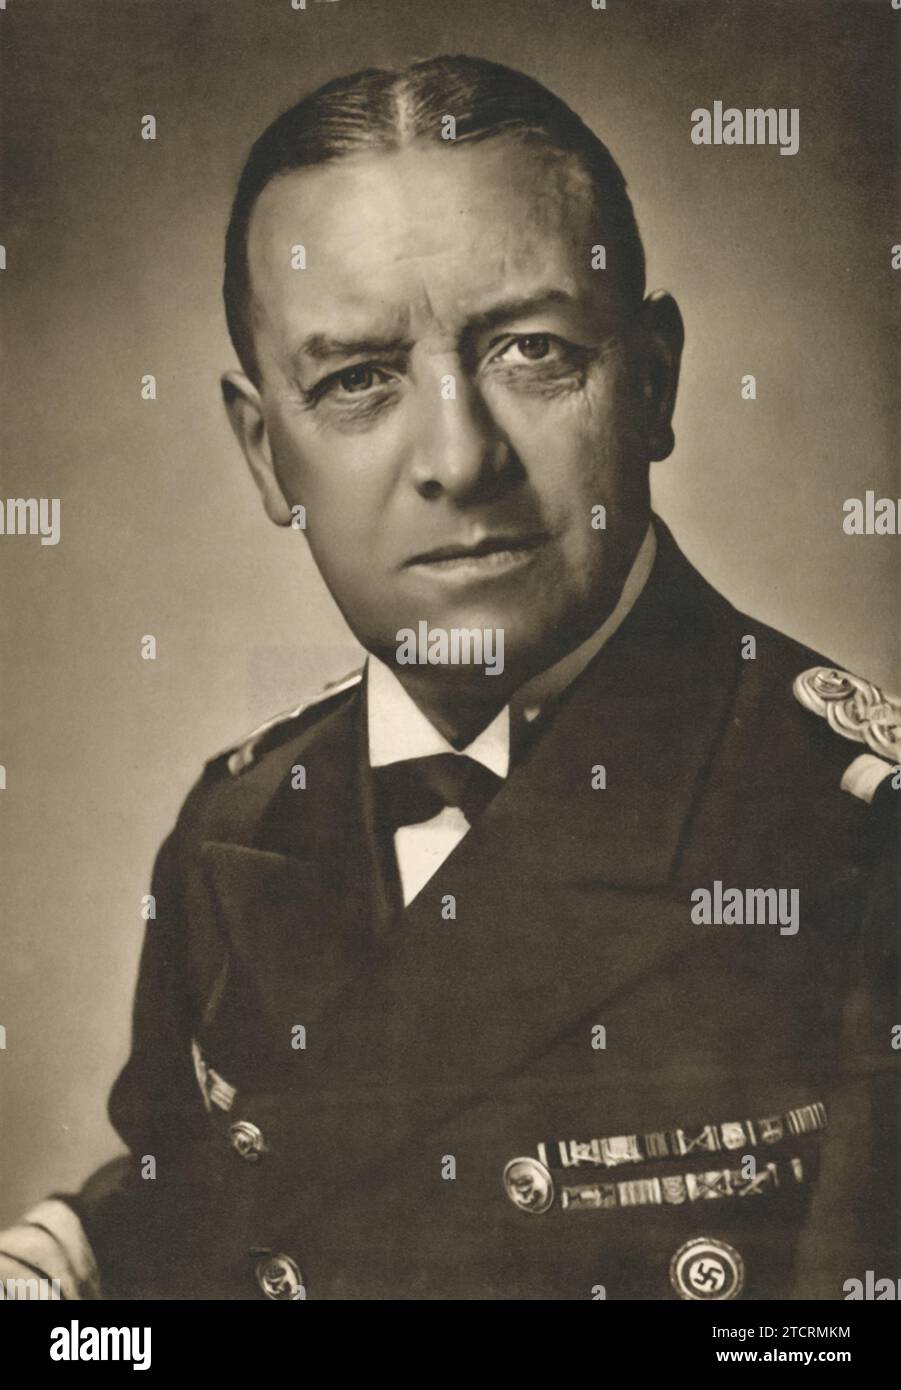 Admiral Erich Raeder (Born: 24 April 1876 - Died: 6 November 1960), Supreme Commander of the Kriegsmarine, the German Navy, during the critical pre-war and early World War II years. Raeder was instrumental in the expansion and modernization of the navy, reflecting the broader militarization of Germany under Nazi rule. Stock Photo